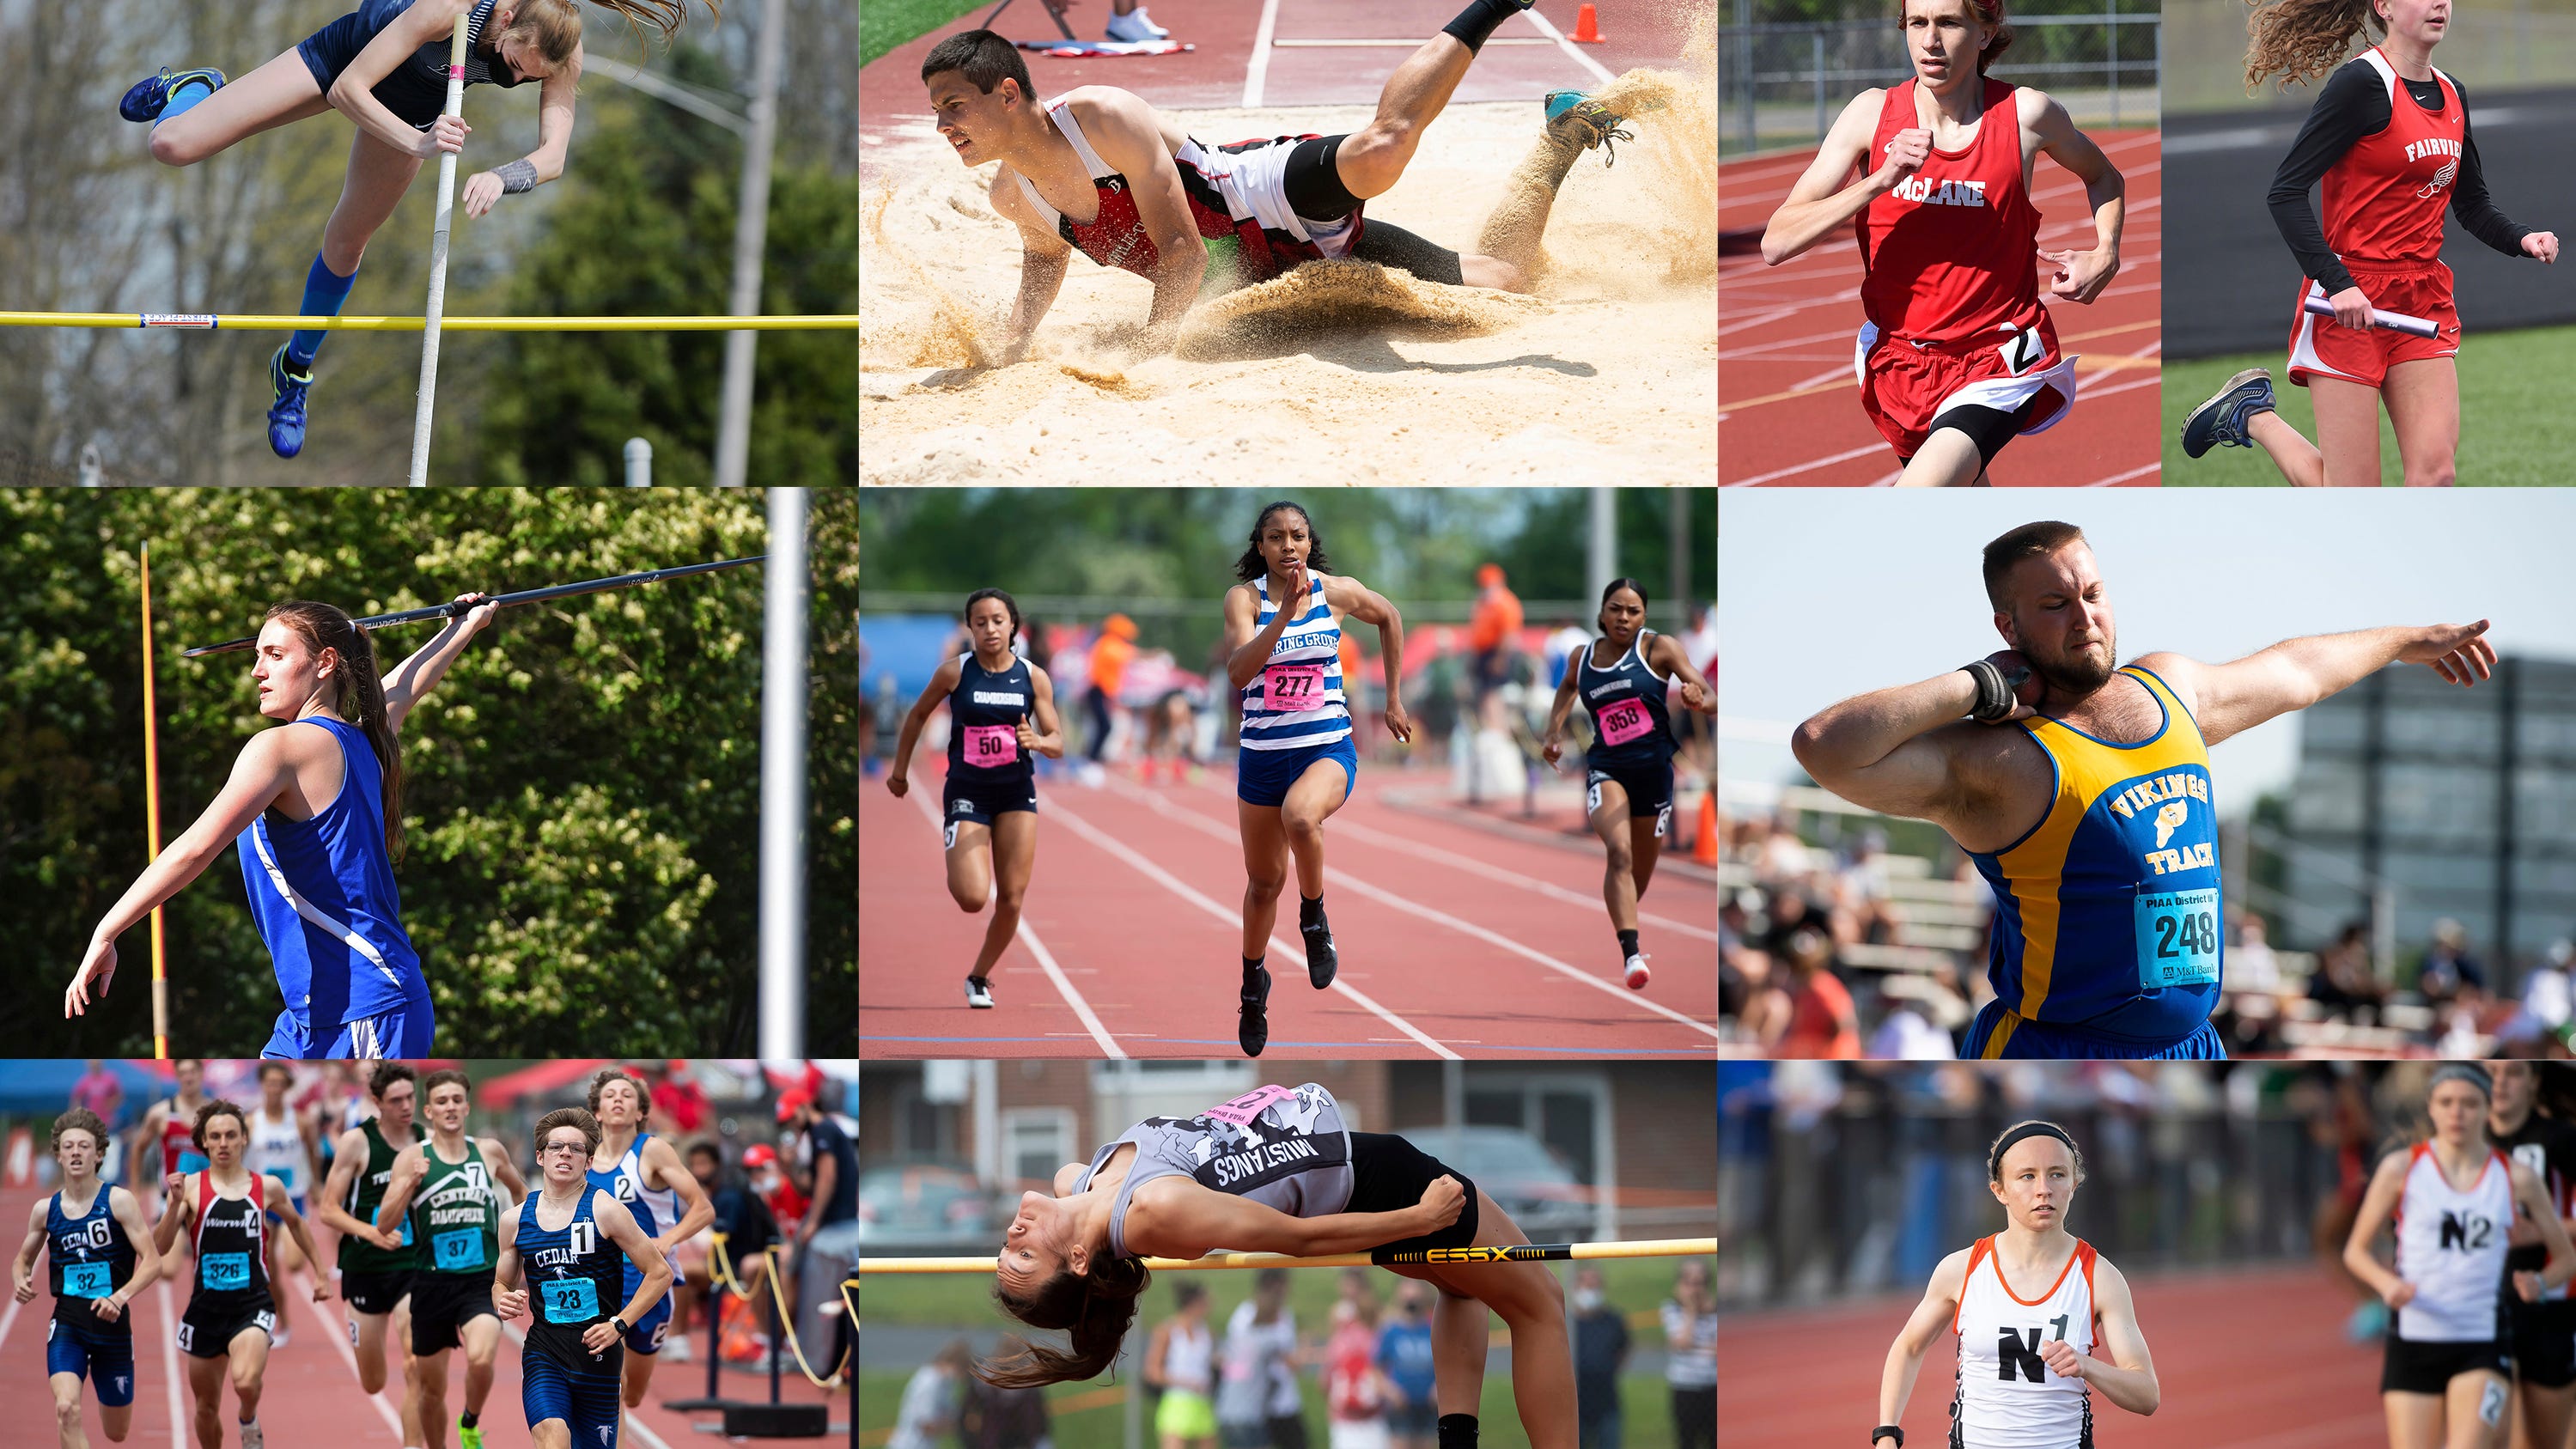 PIAA track and field championships Athletes to watch at Shippensburg